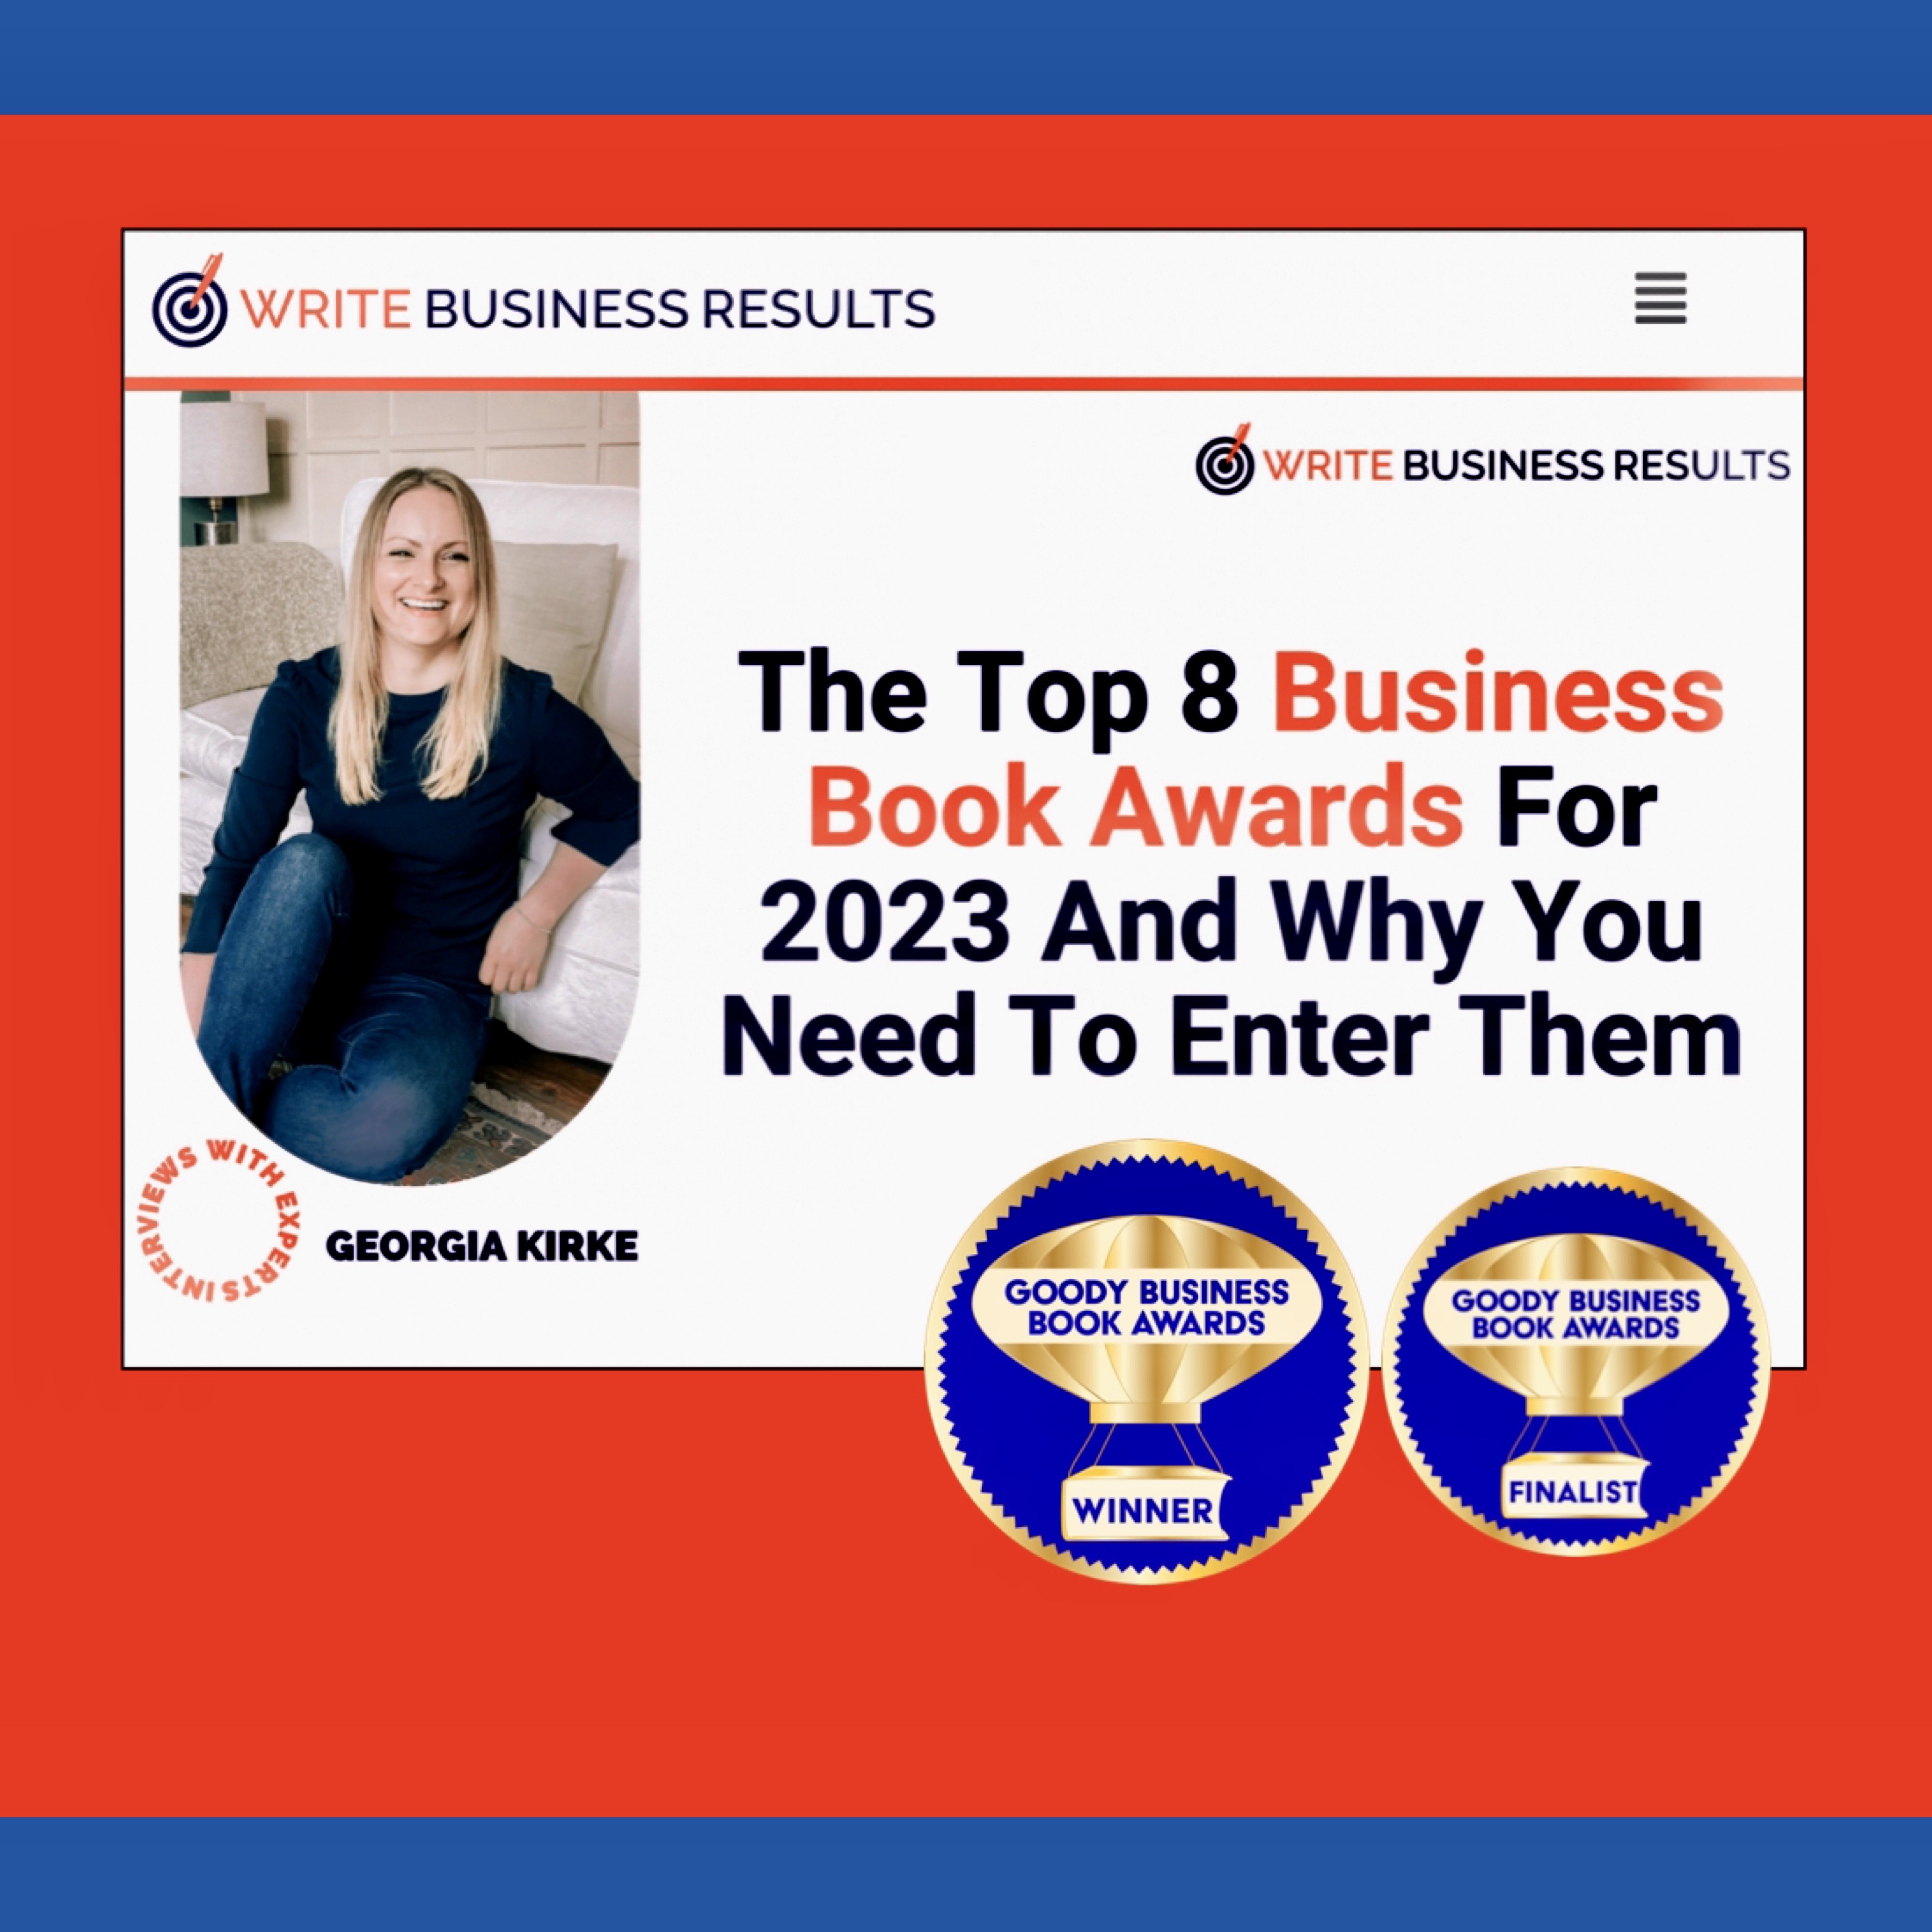 Goody Business Book Awards honored to be in Top Business Book Awards summary by Write Business Results for 2023